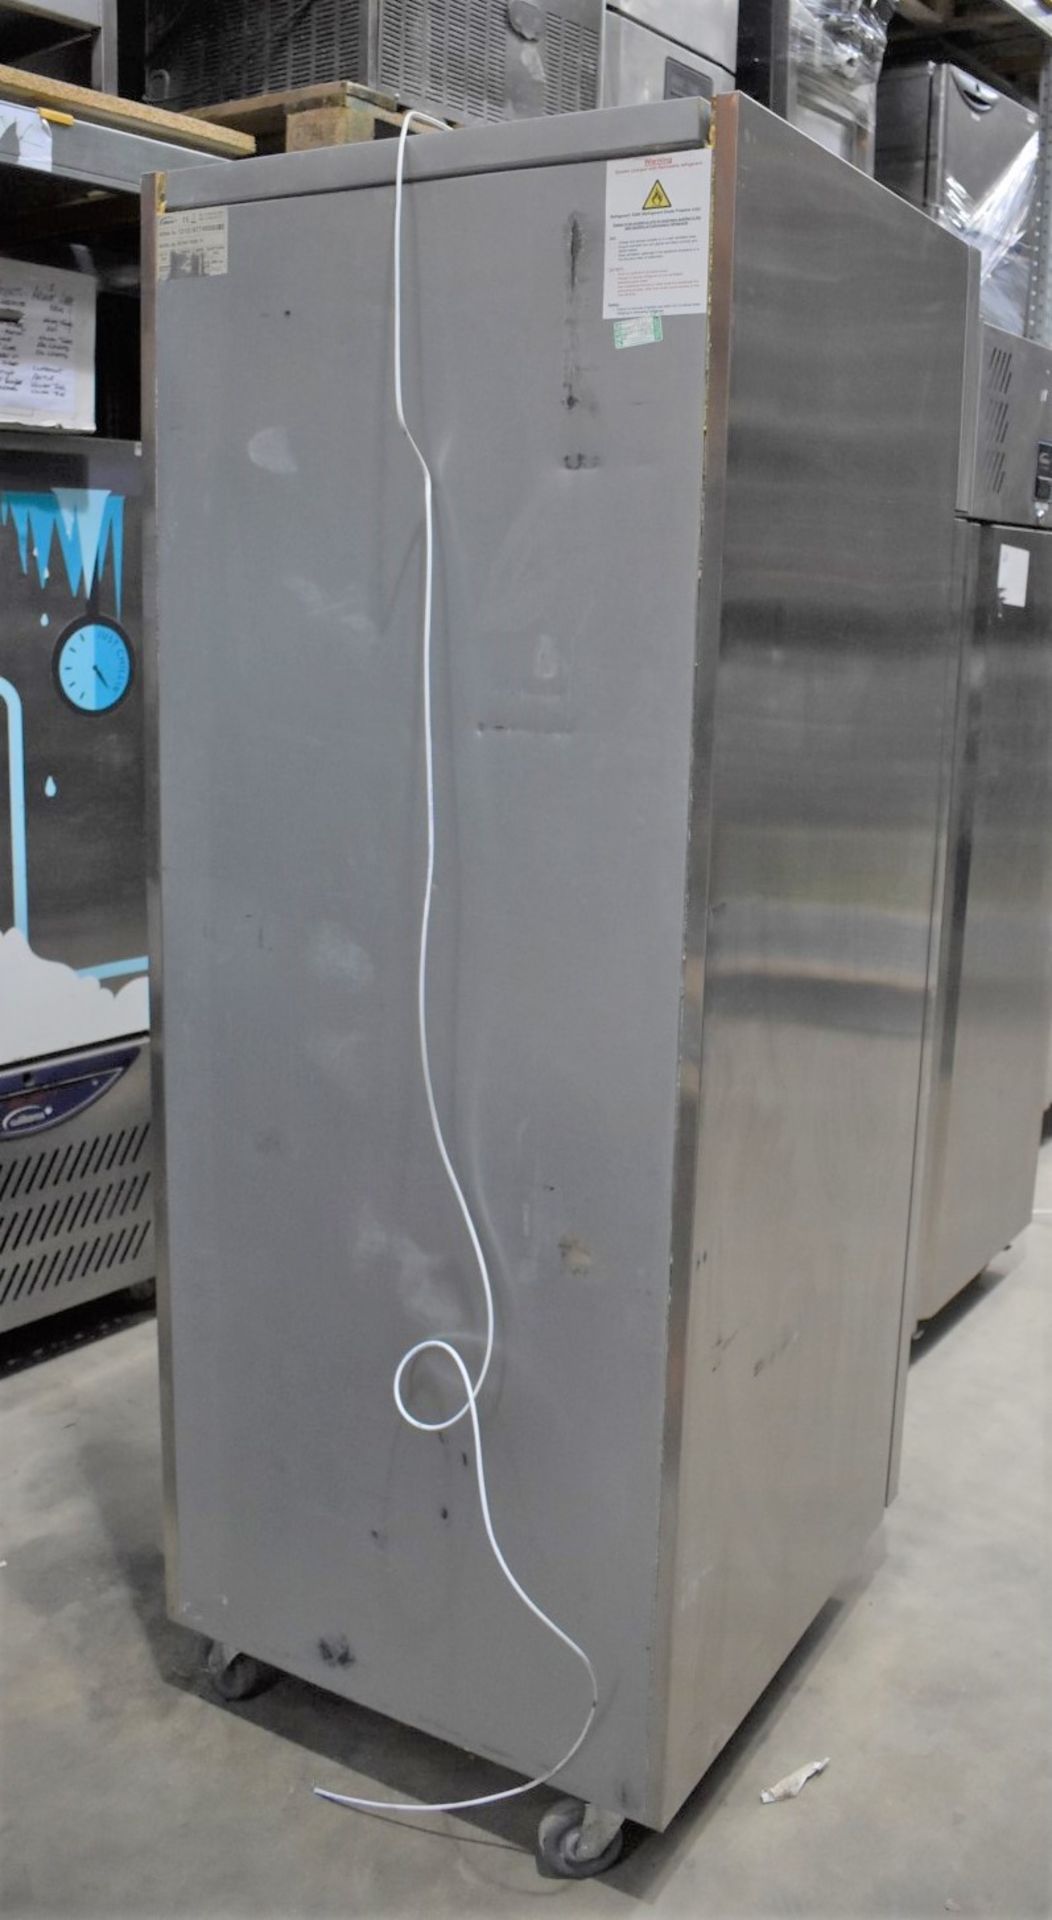 1 x Williams Upright Single Door Refrigerator With Stainless Steel Exterior - Model HS1SA - Recently - Image 6 of 12